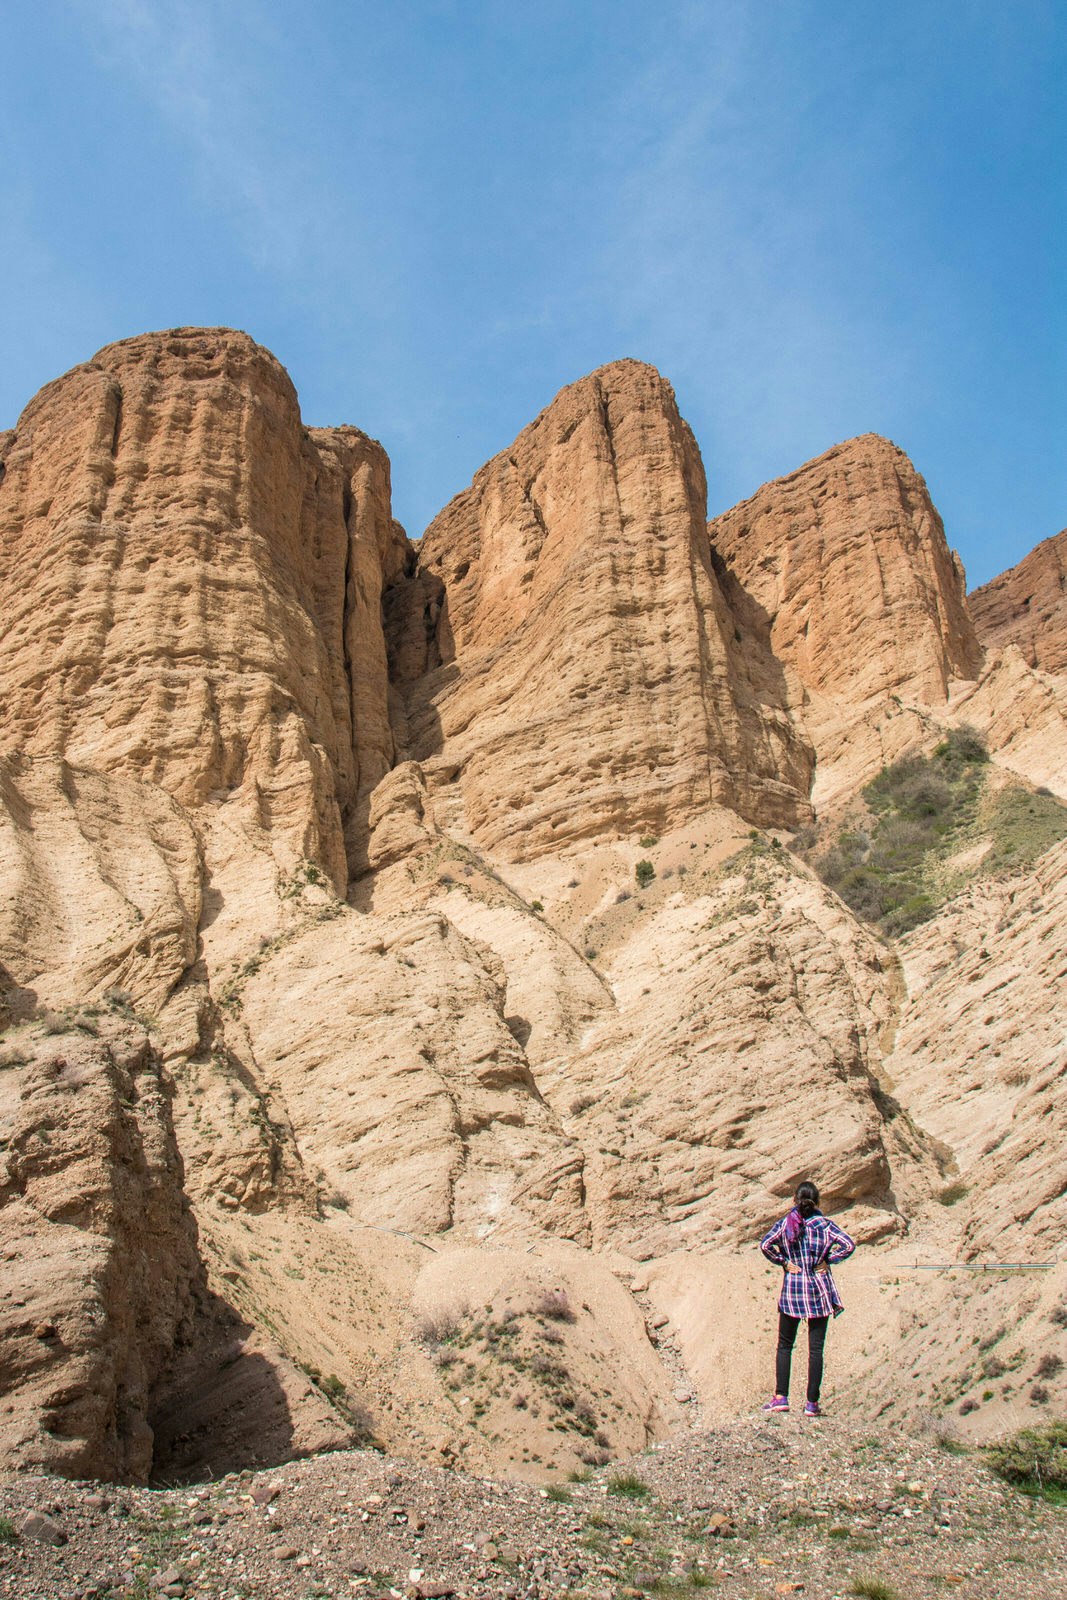 A lone woman stands in front of a dramatic rock formation in Iran